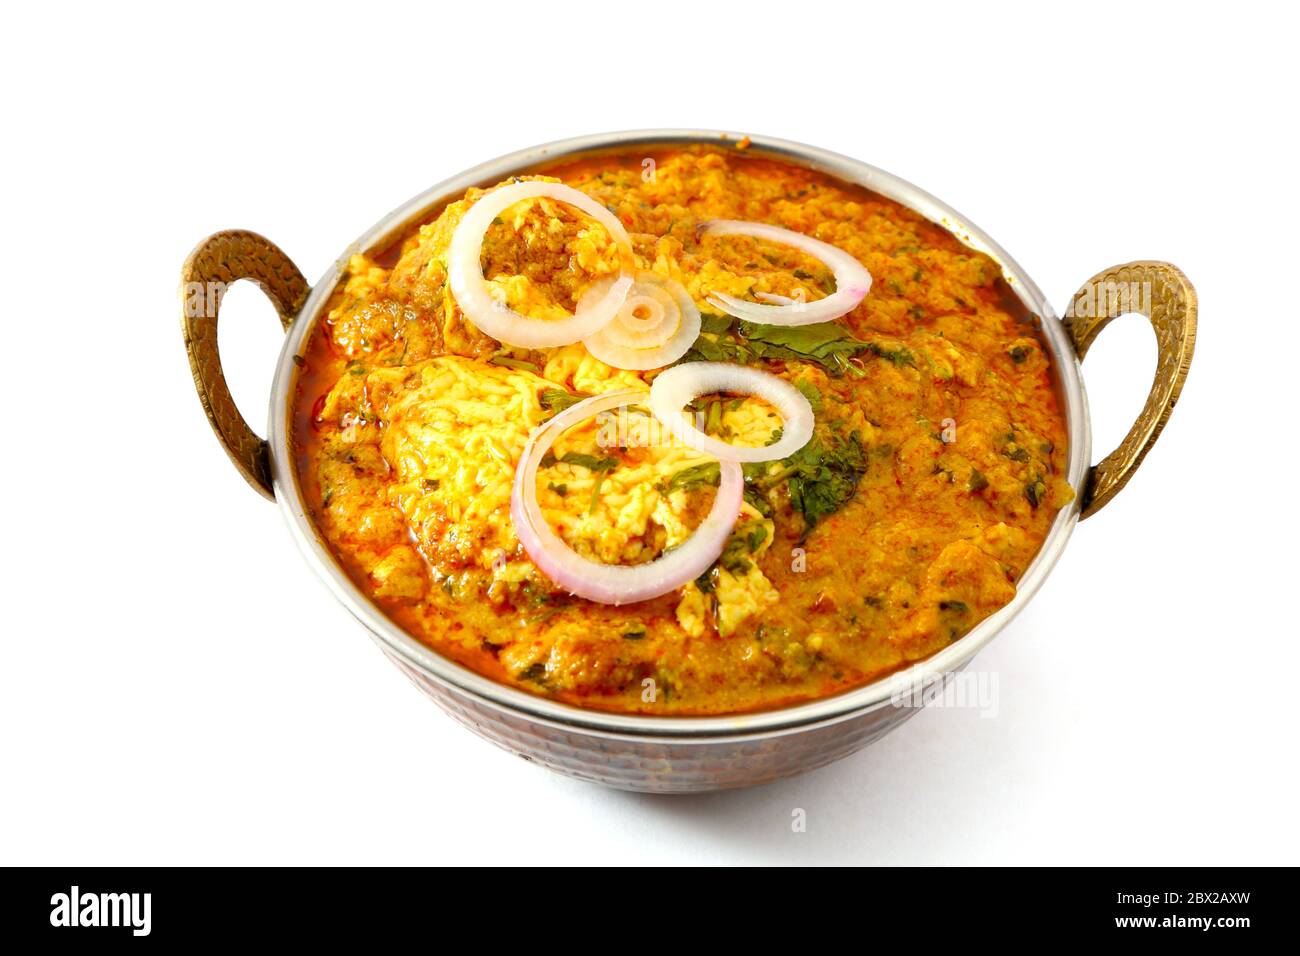 https://c8.alamy.com/comp/2BX2AXW/indian-style-cottage-cheese-vegetarian-curry-dish-kadai-paneer-traditional-indian-food-2BX2AXW.jpg